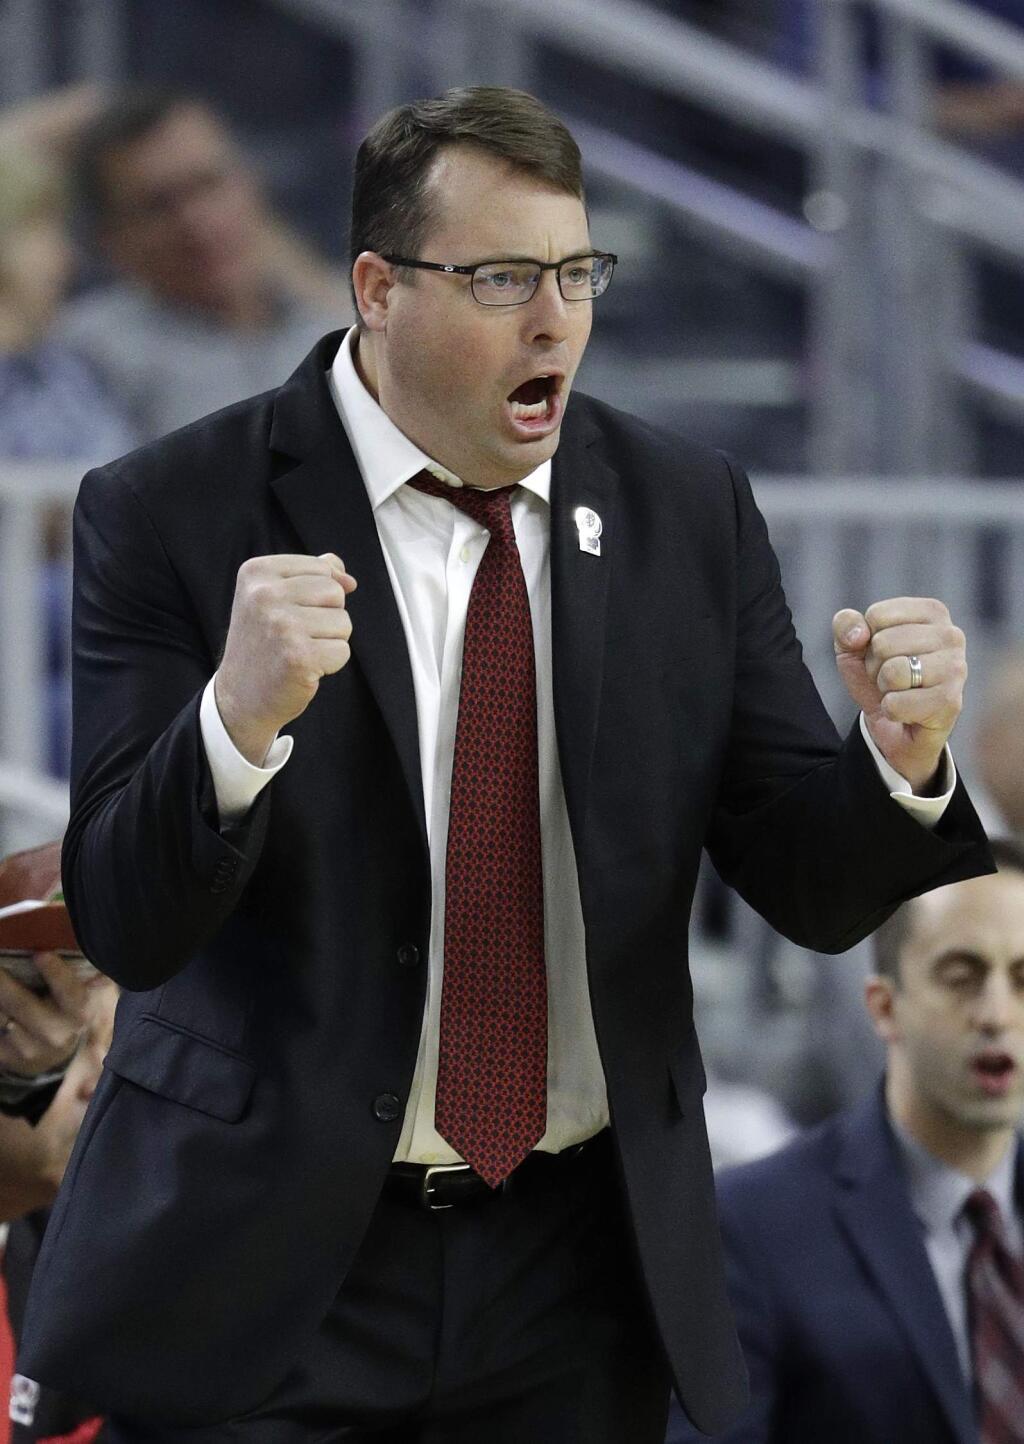 Stanford head coach Jerod Haase reacts after a play against Arizona State during the second half of an NCAA college basketball game in the first round of the Pac-12 men's tournament, Wednesday, March 8, 2017, in Las Vegas. Arizona State won 98-88. (AP Photo/John Locher)